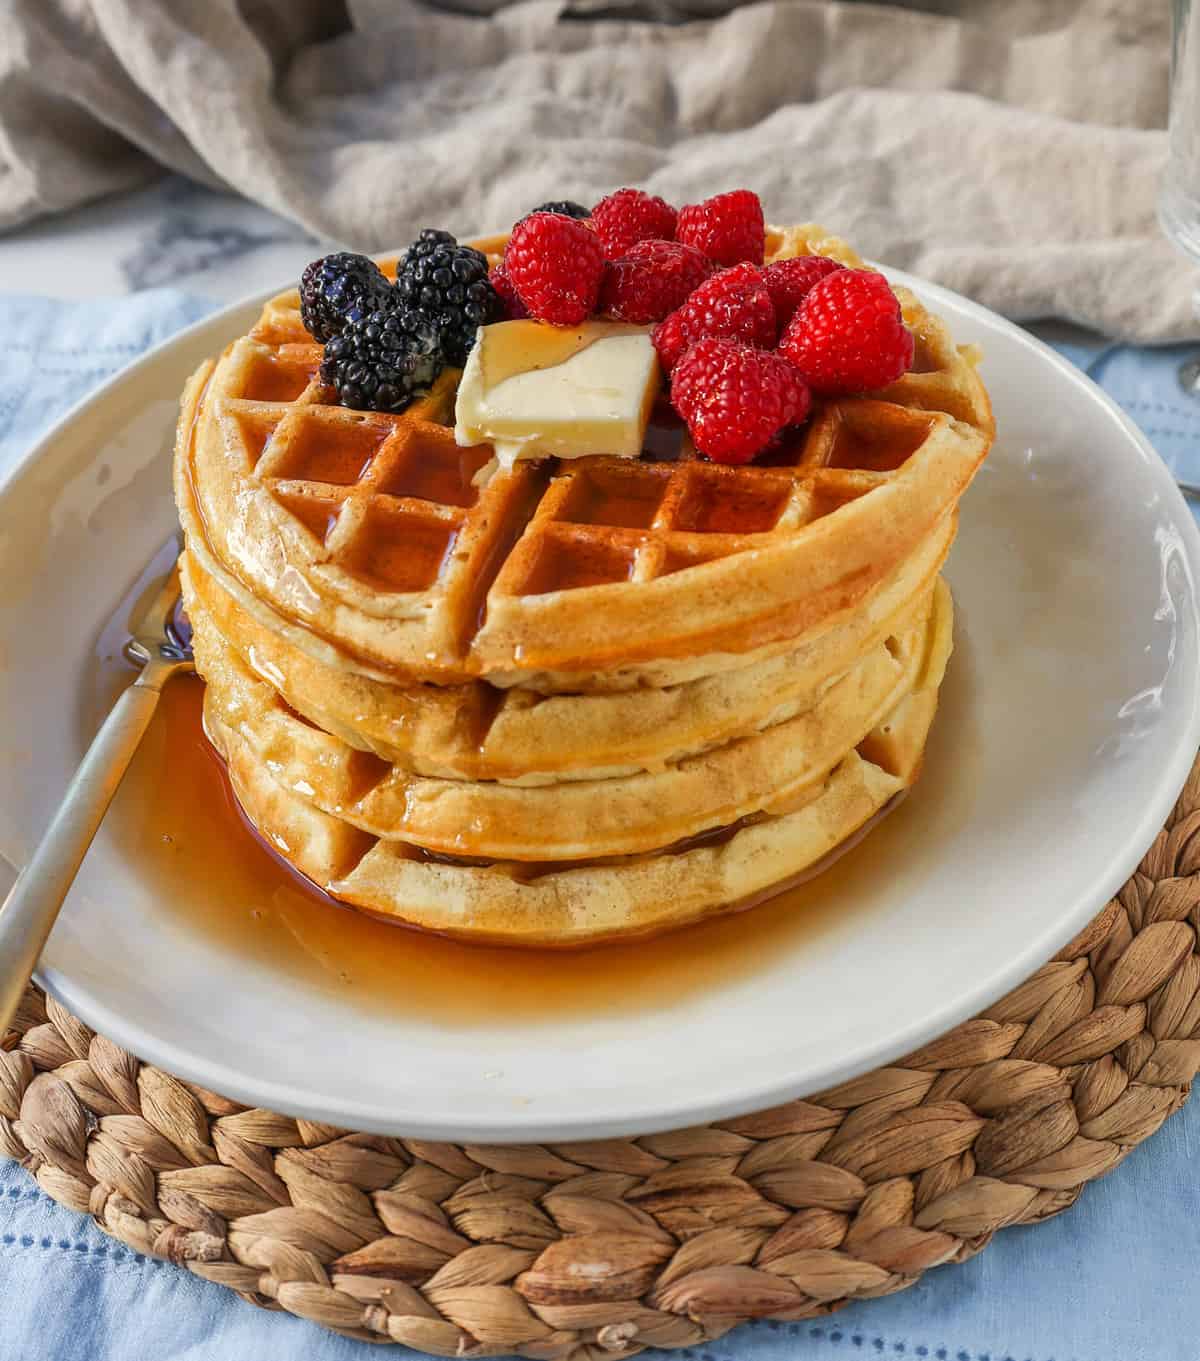 Buttermilk Waffles. How to make the best homemade Belgian waffles at home. Buttermilk waffles with crispy edges and chewy centers make the perfect weekend breakfast!